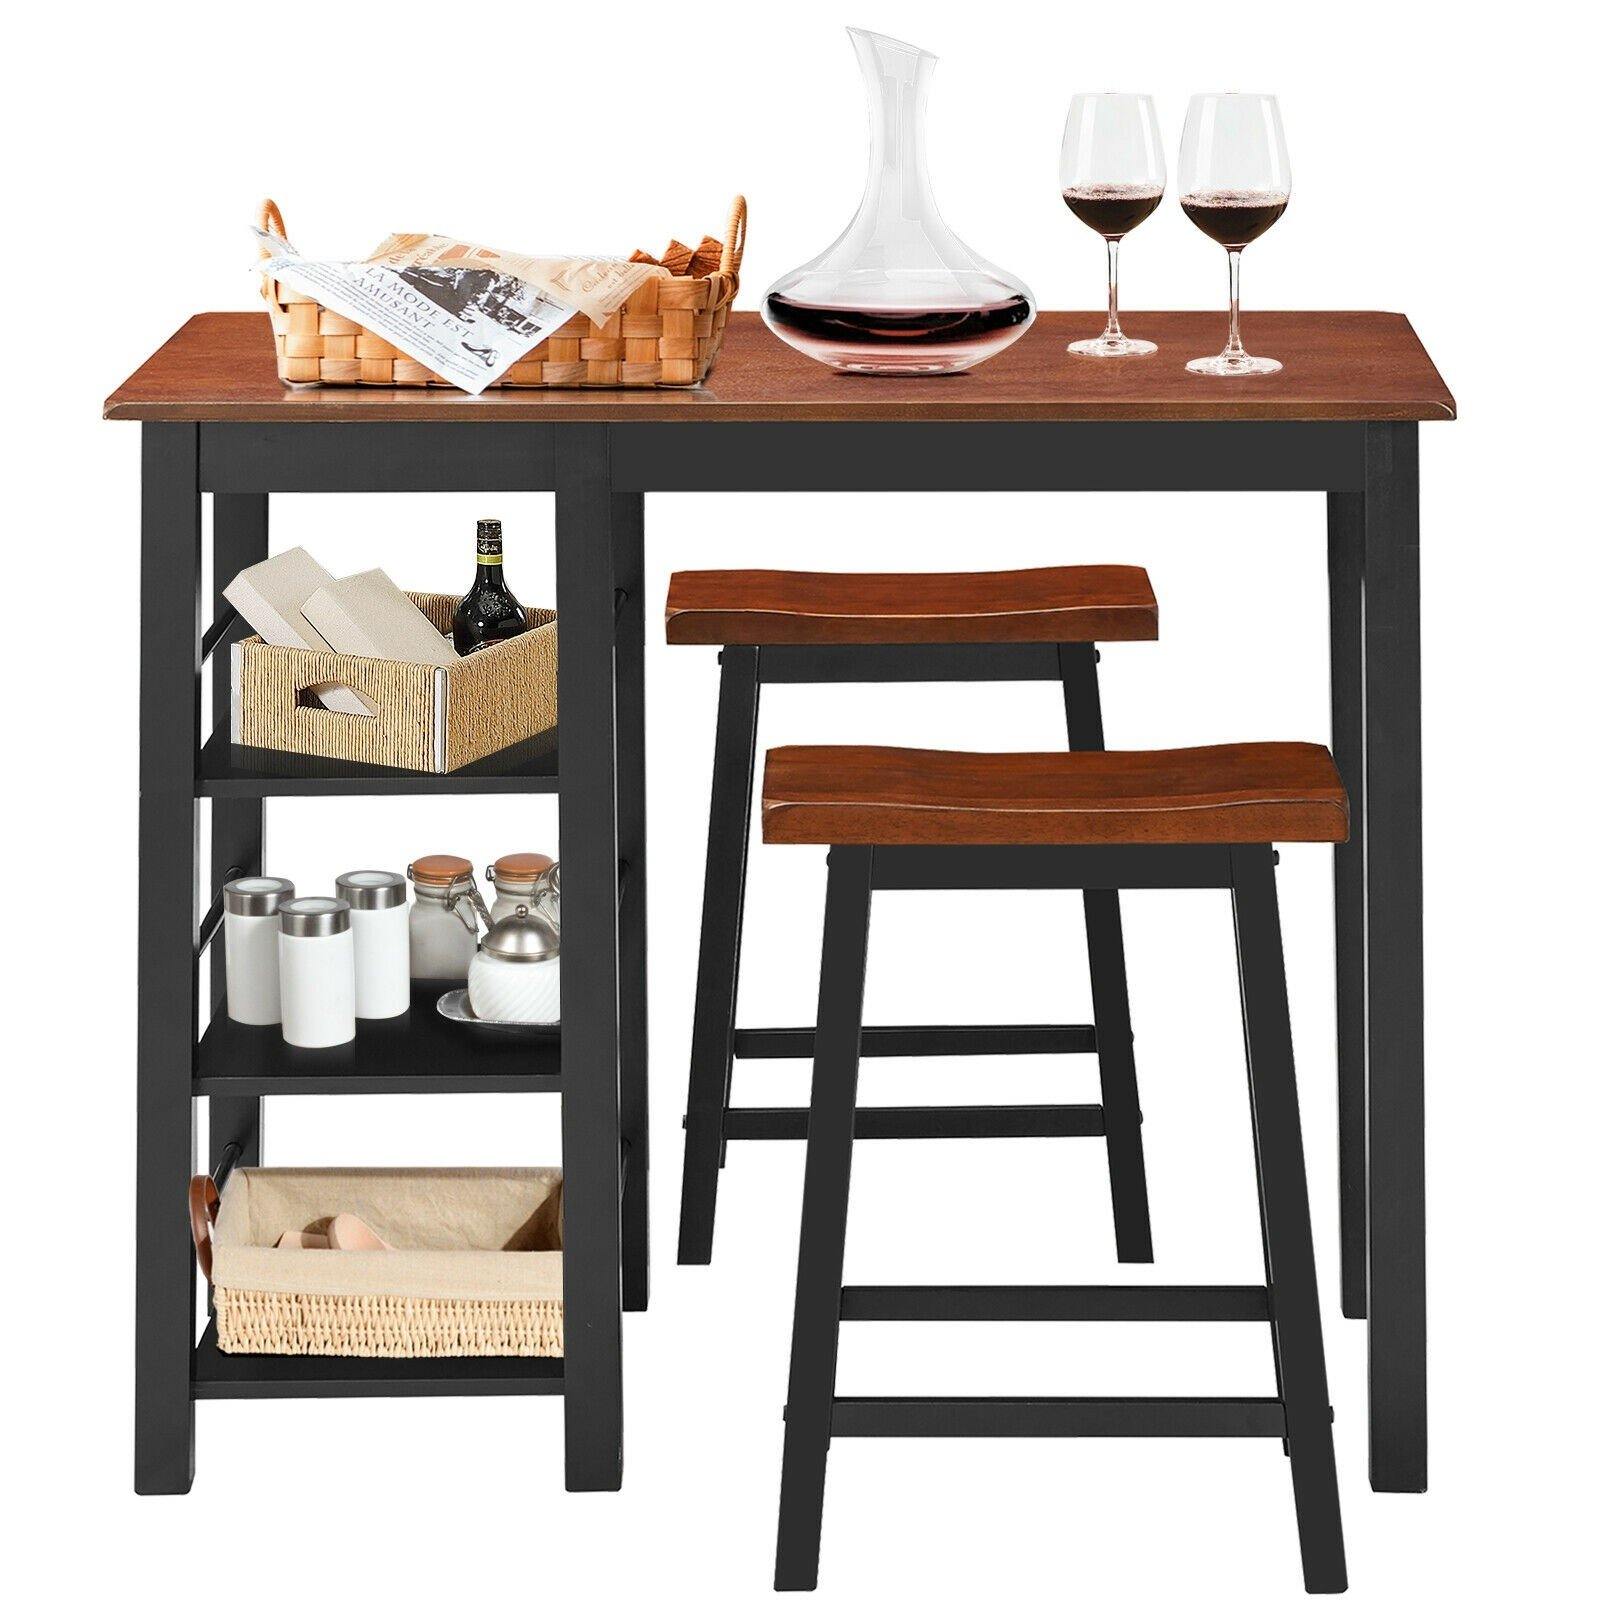 3 Piece Dining Set, Entirely Wood Counter Height Table Set with 2 Chair and 3-Tier Storage Shelves - Giantexus